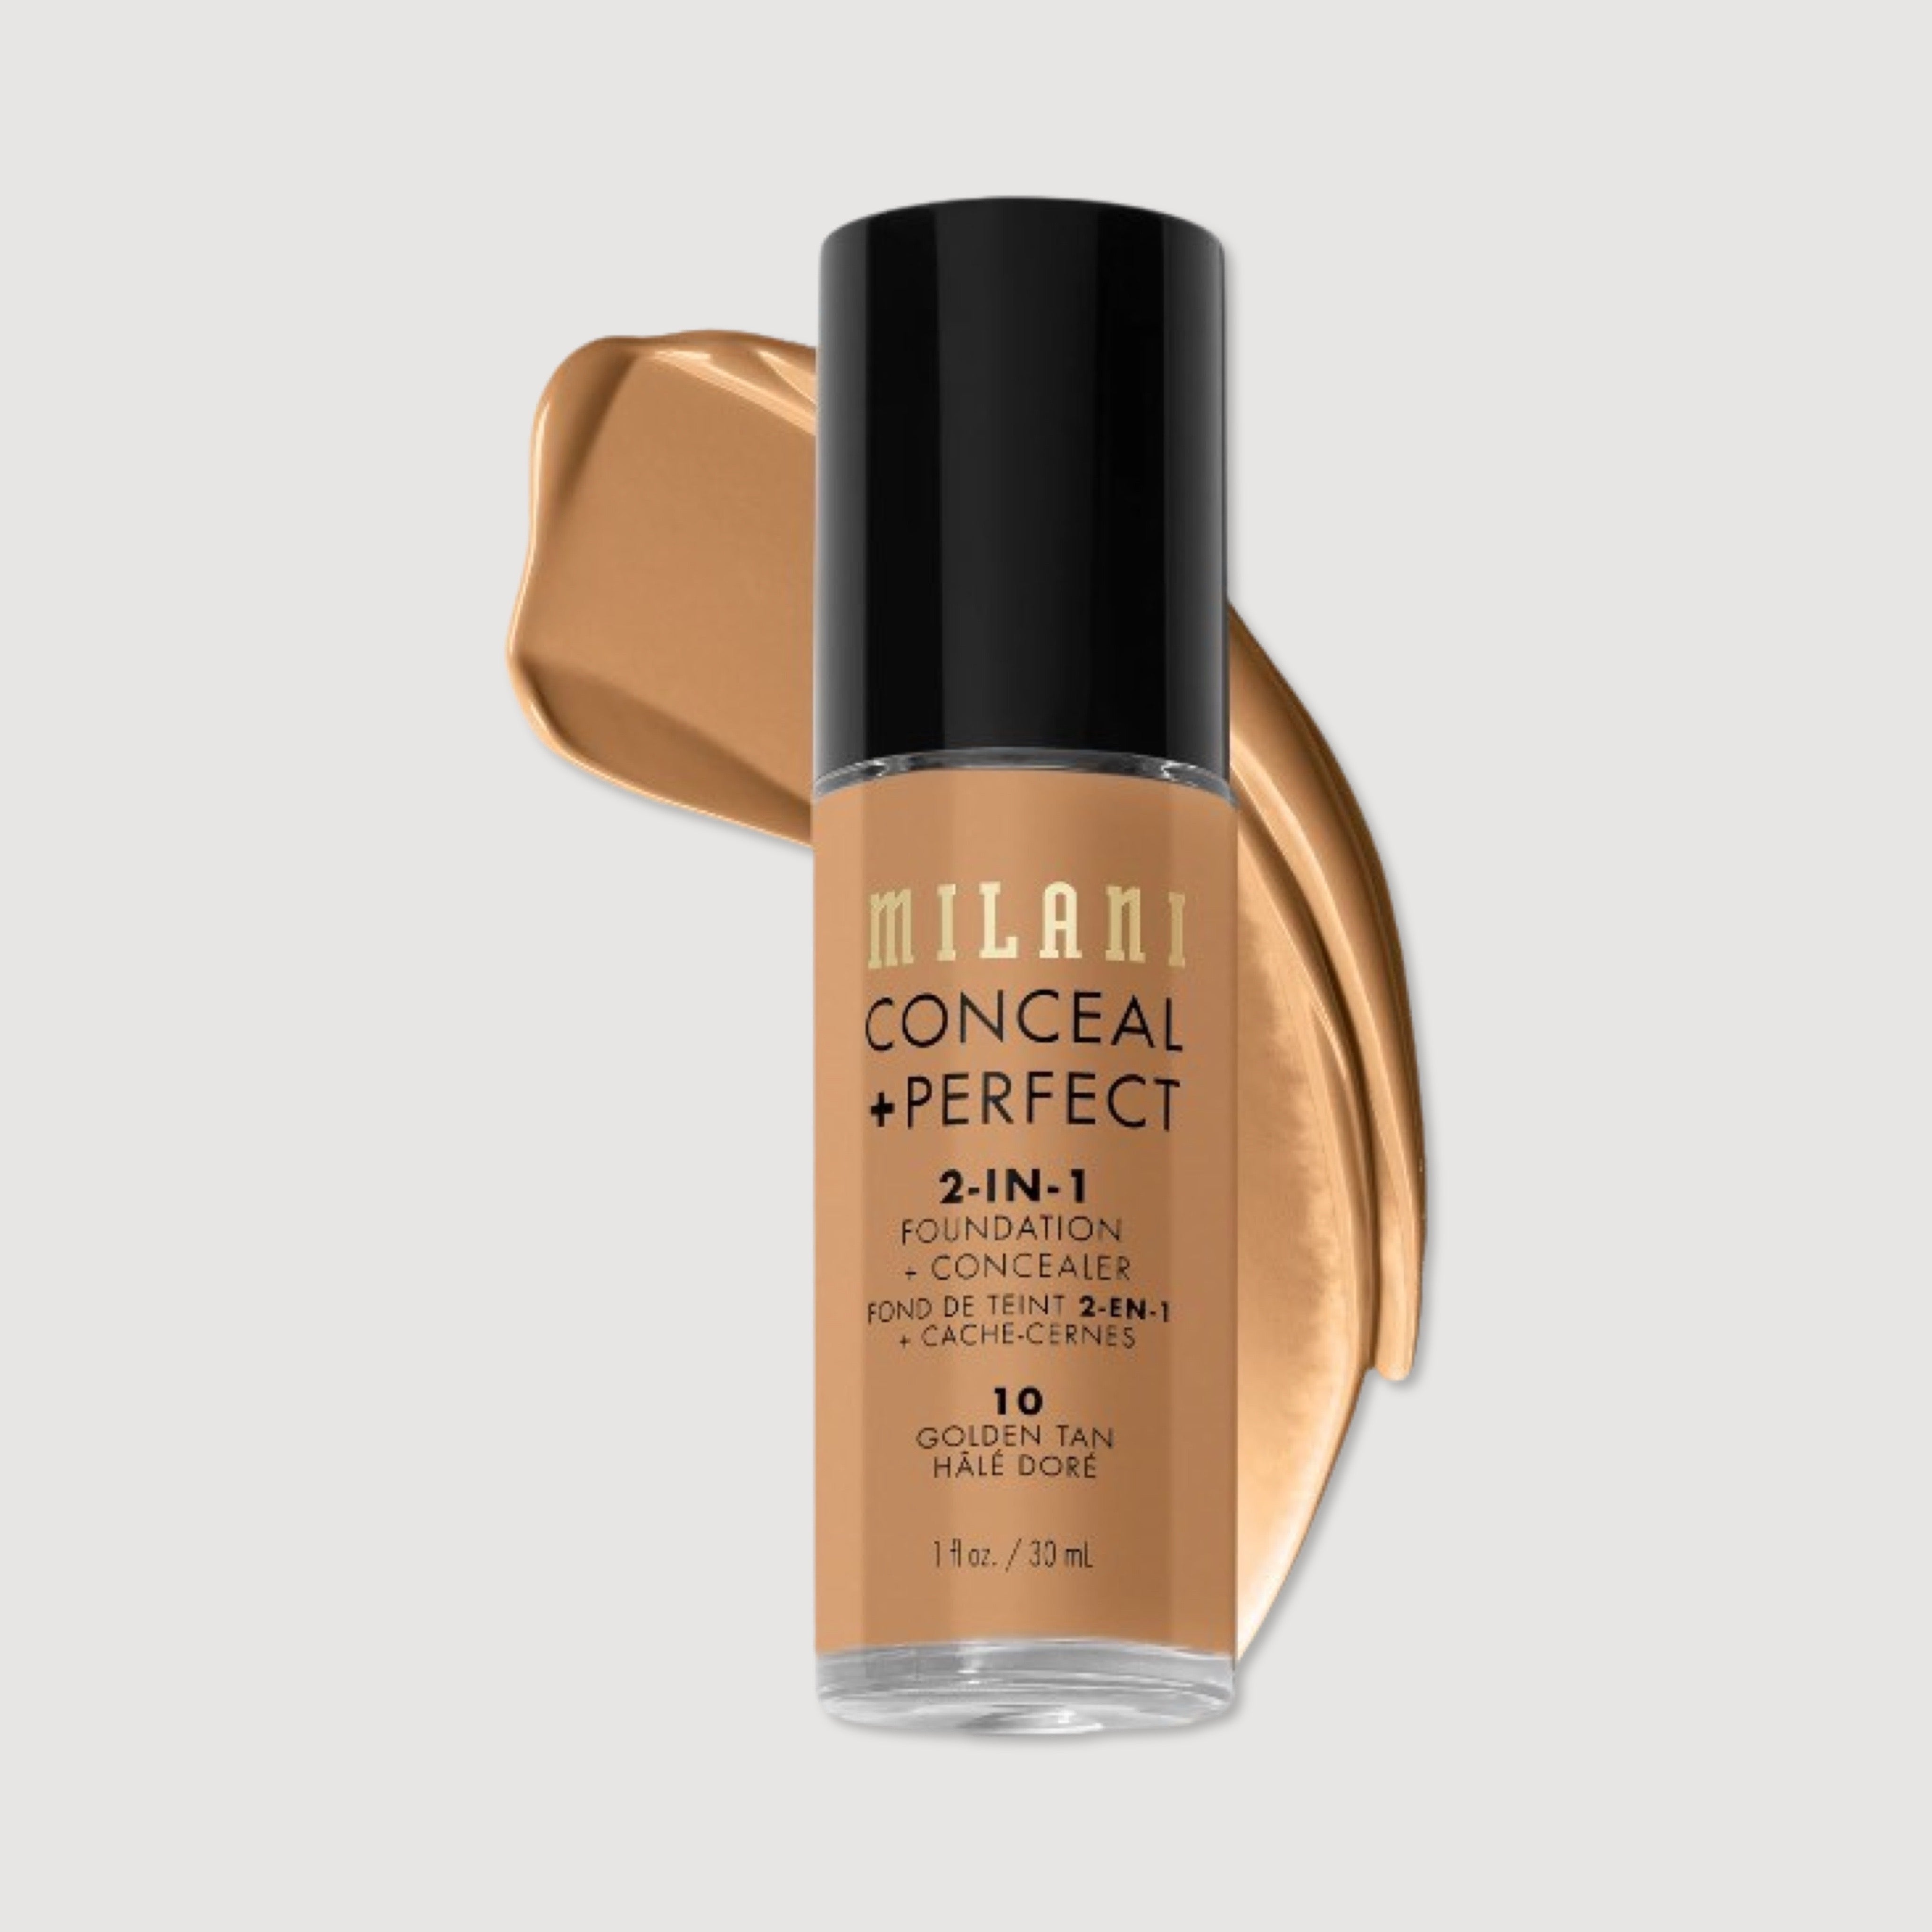 Milani Conceal + Perfect 2-IN-1 Foundation and Concealer